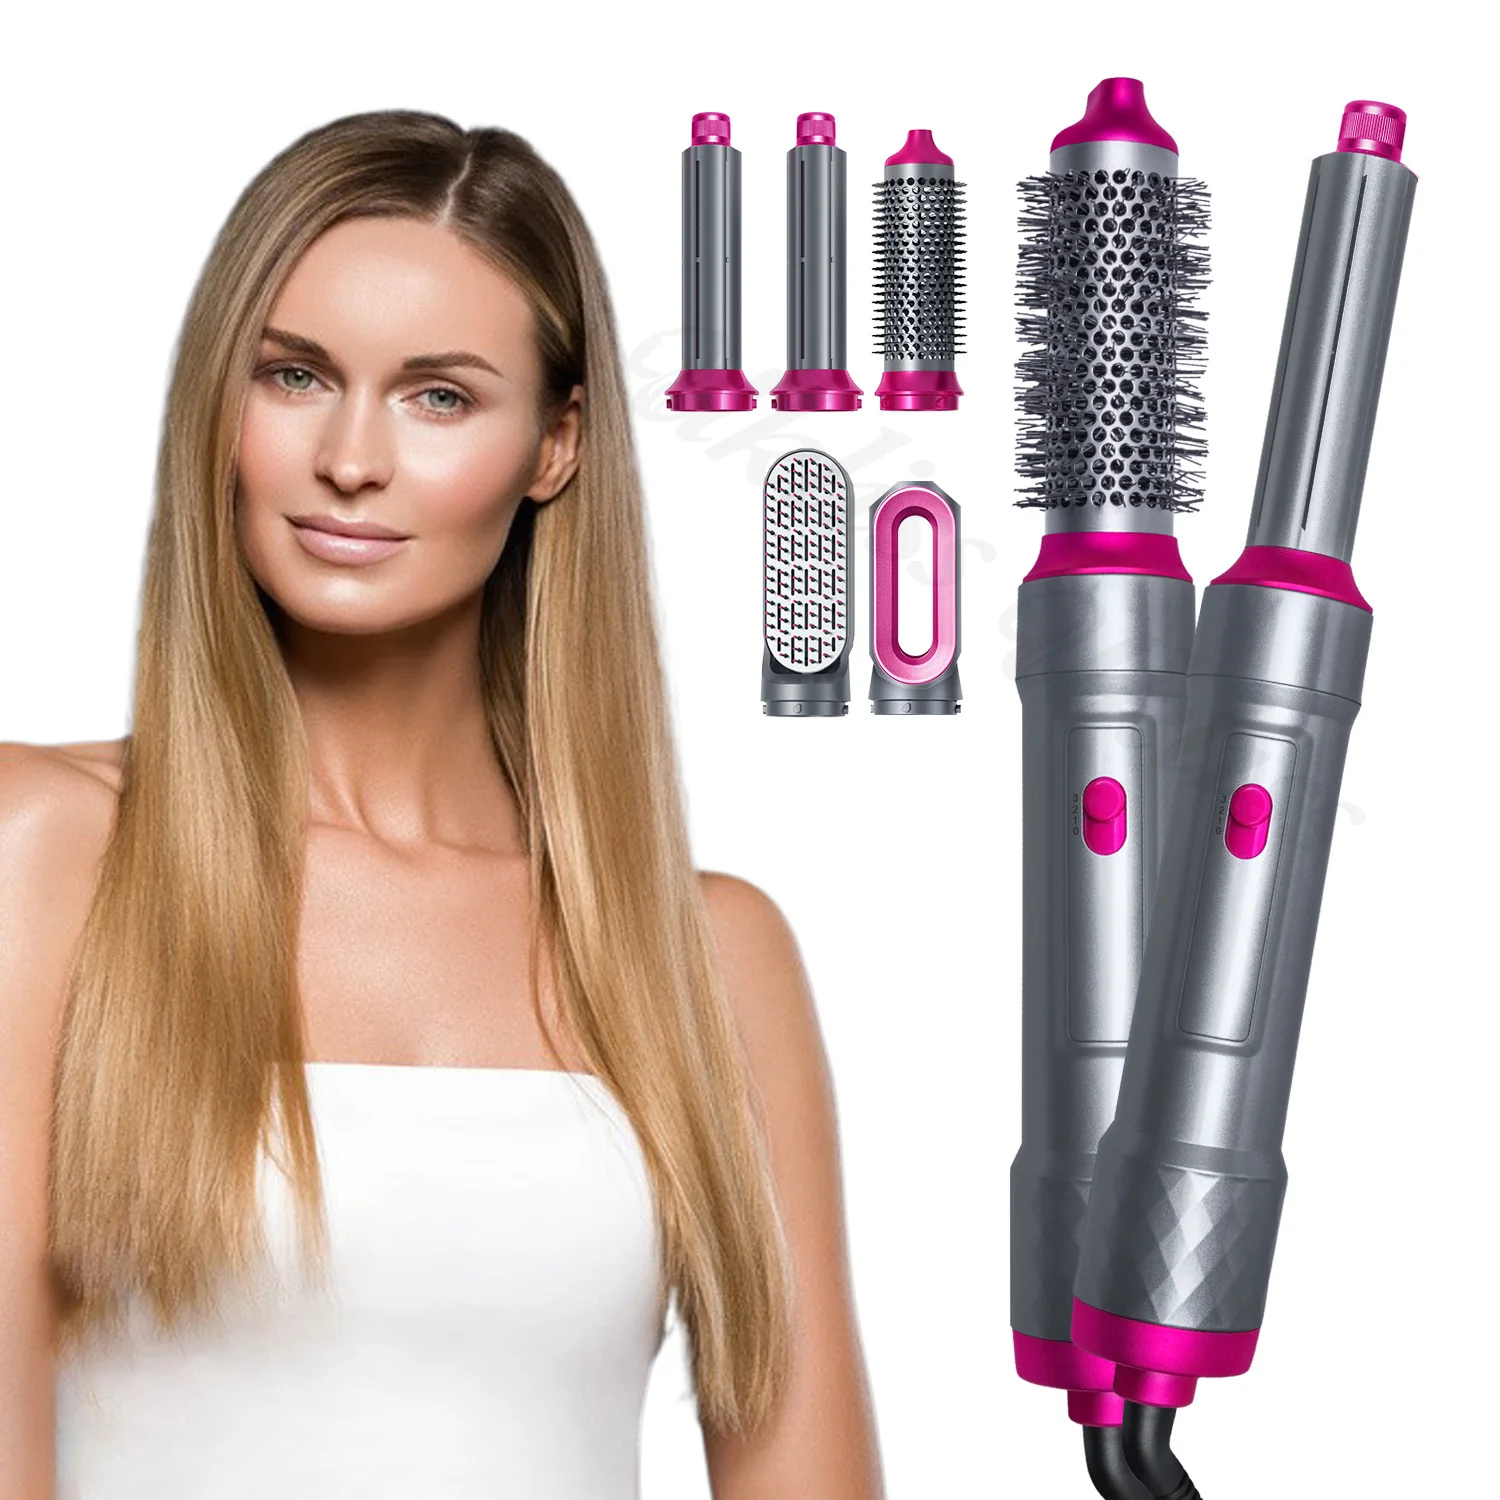 

Hot Air Styling Comb Electric Hair Straightener 5 In 1 Hair Dryer Brush 1200W Blow Dryer Hair Blowing Brush Curling Iron Styler